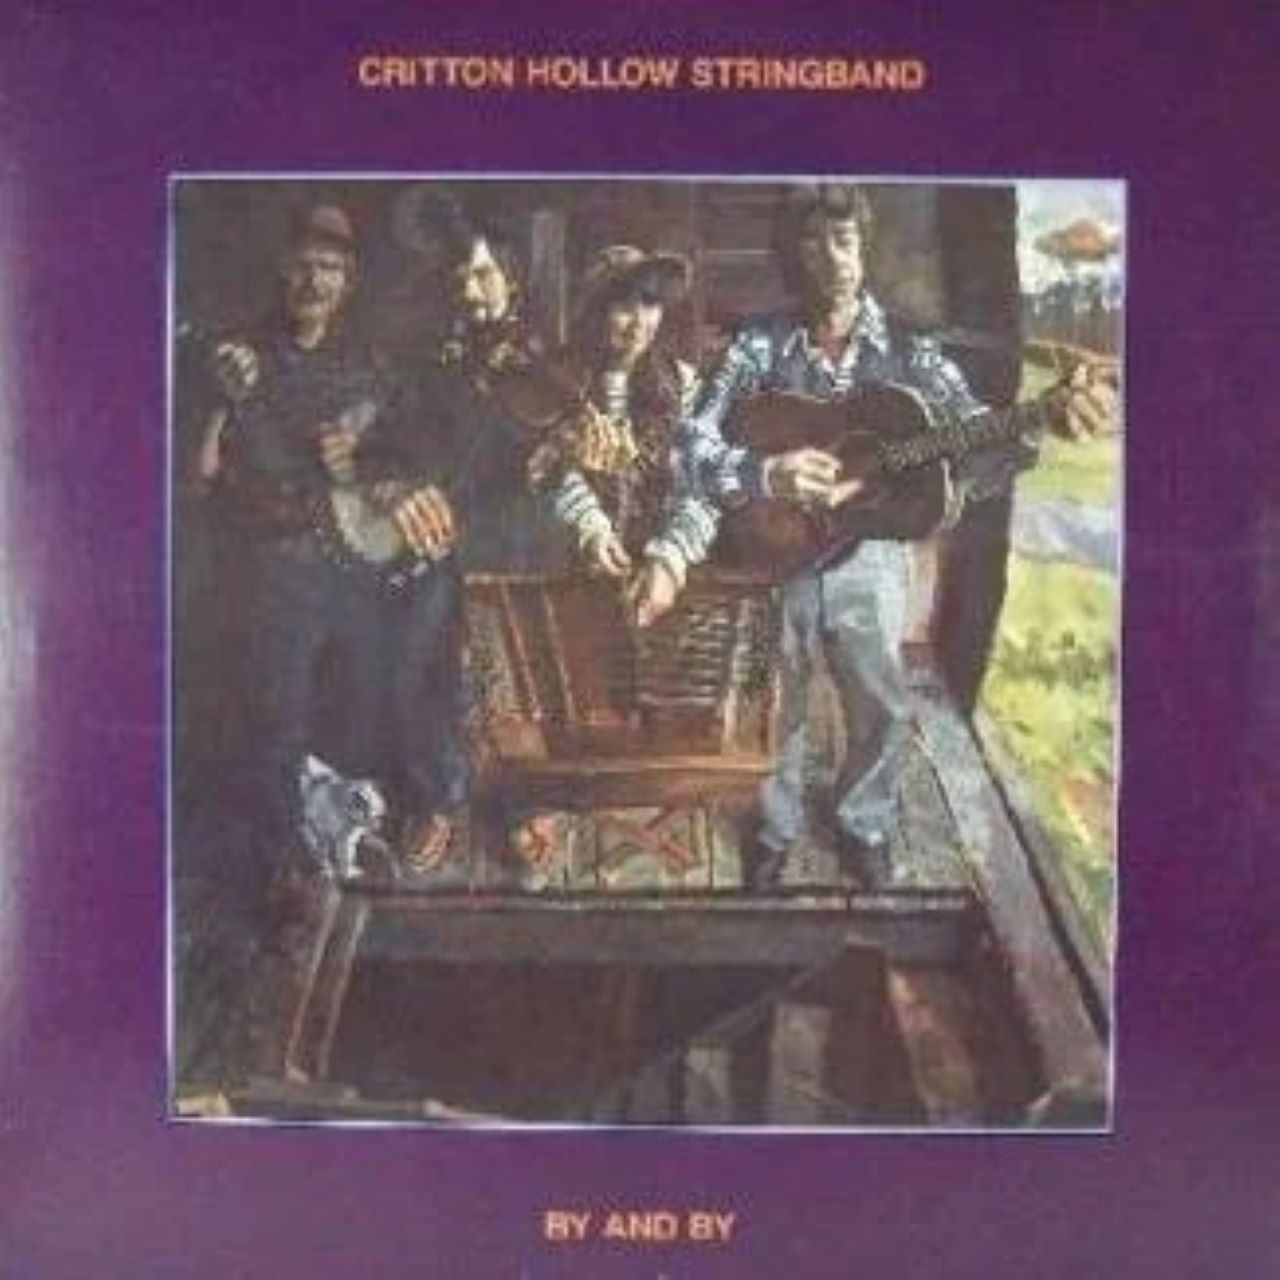 Critton Hollow String Band – By And By cover album